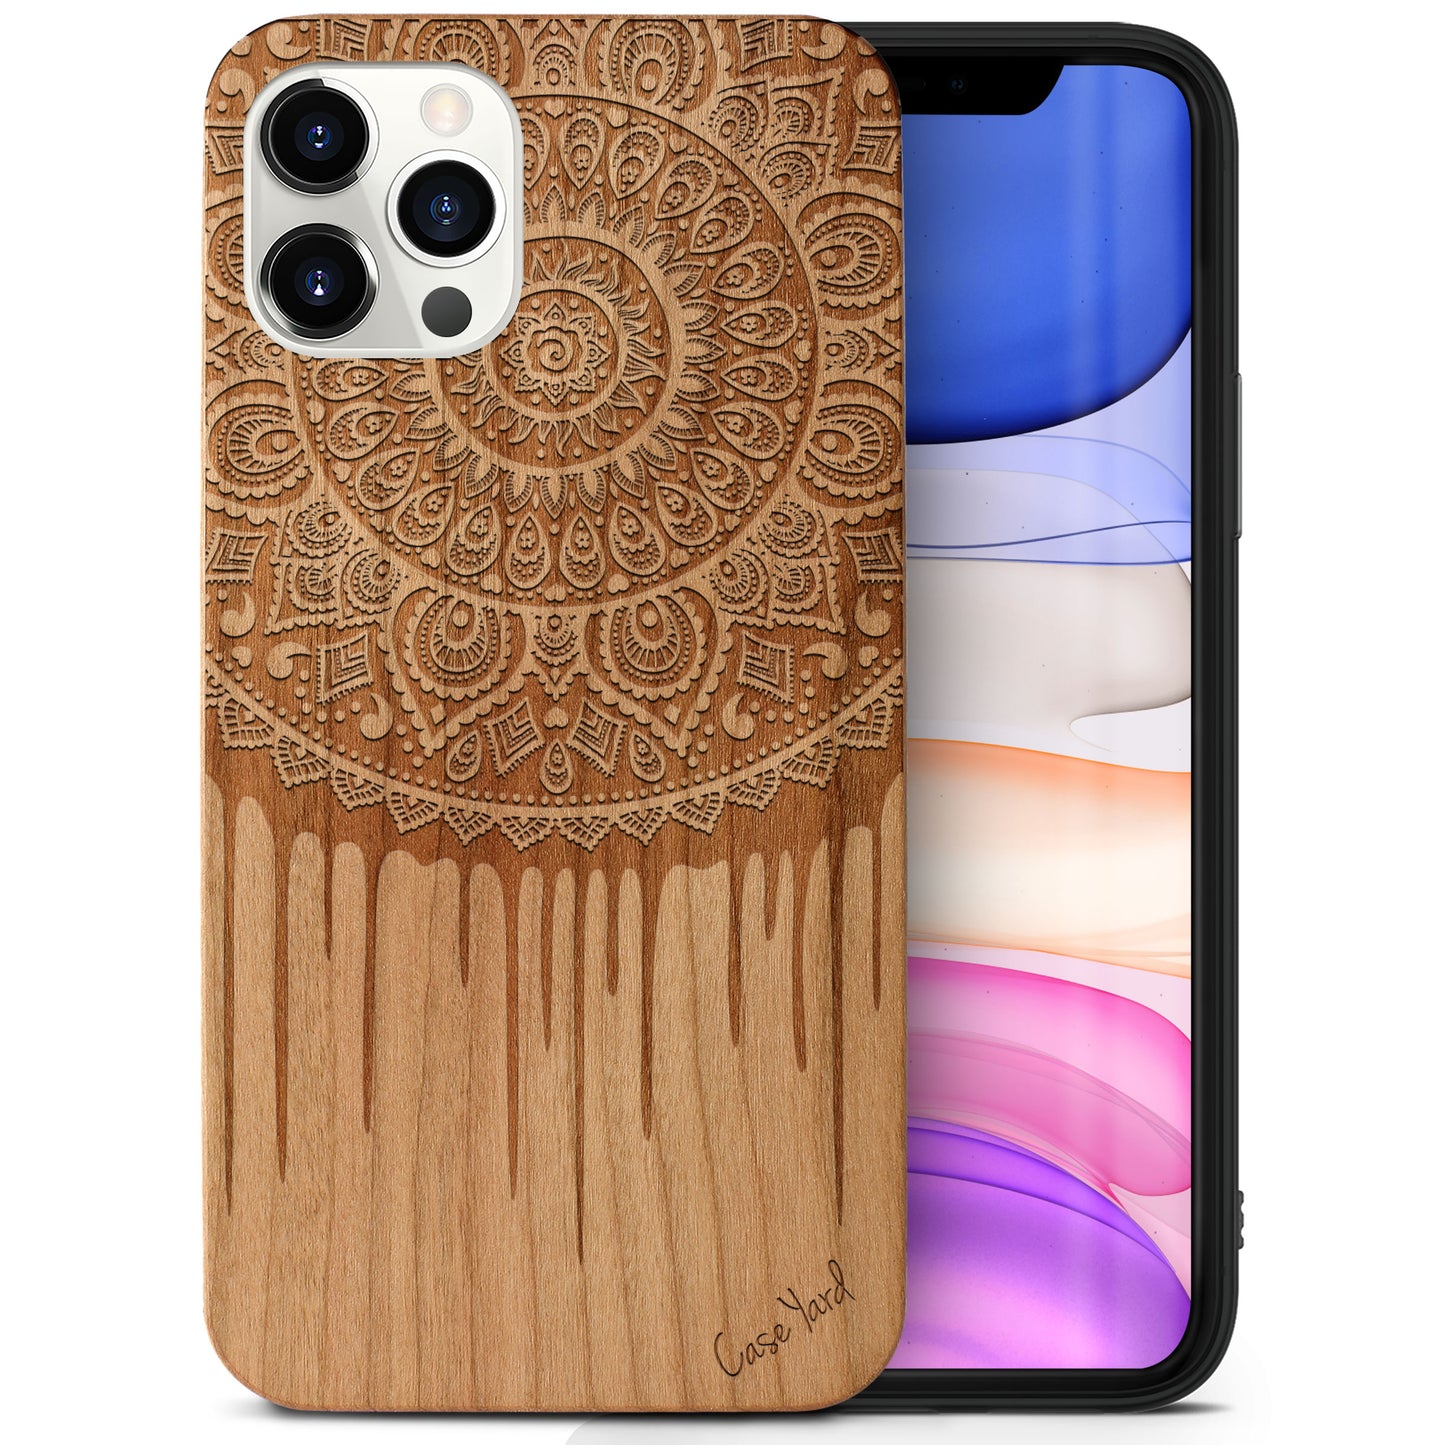 Wooden Cell Phone Case Cover, Laser Engraved case for iPhone & Samsung phone Dripping Mandala Wood Design